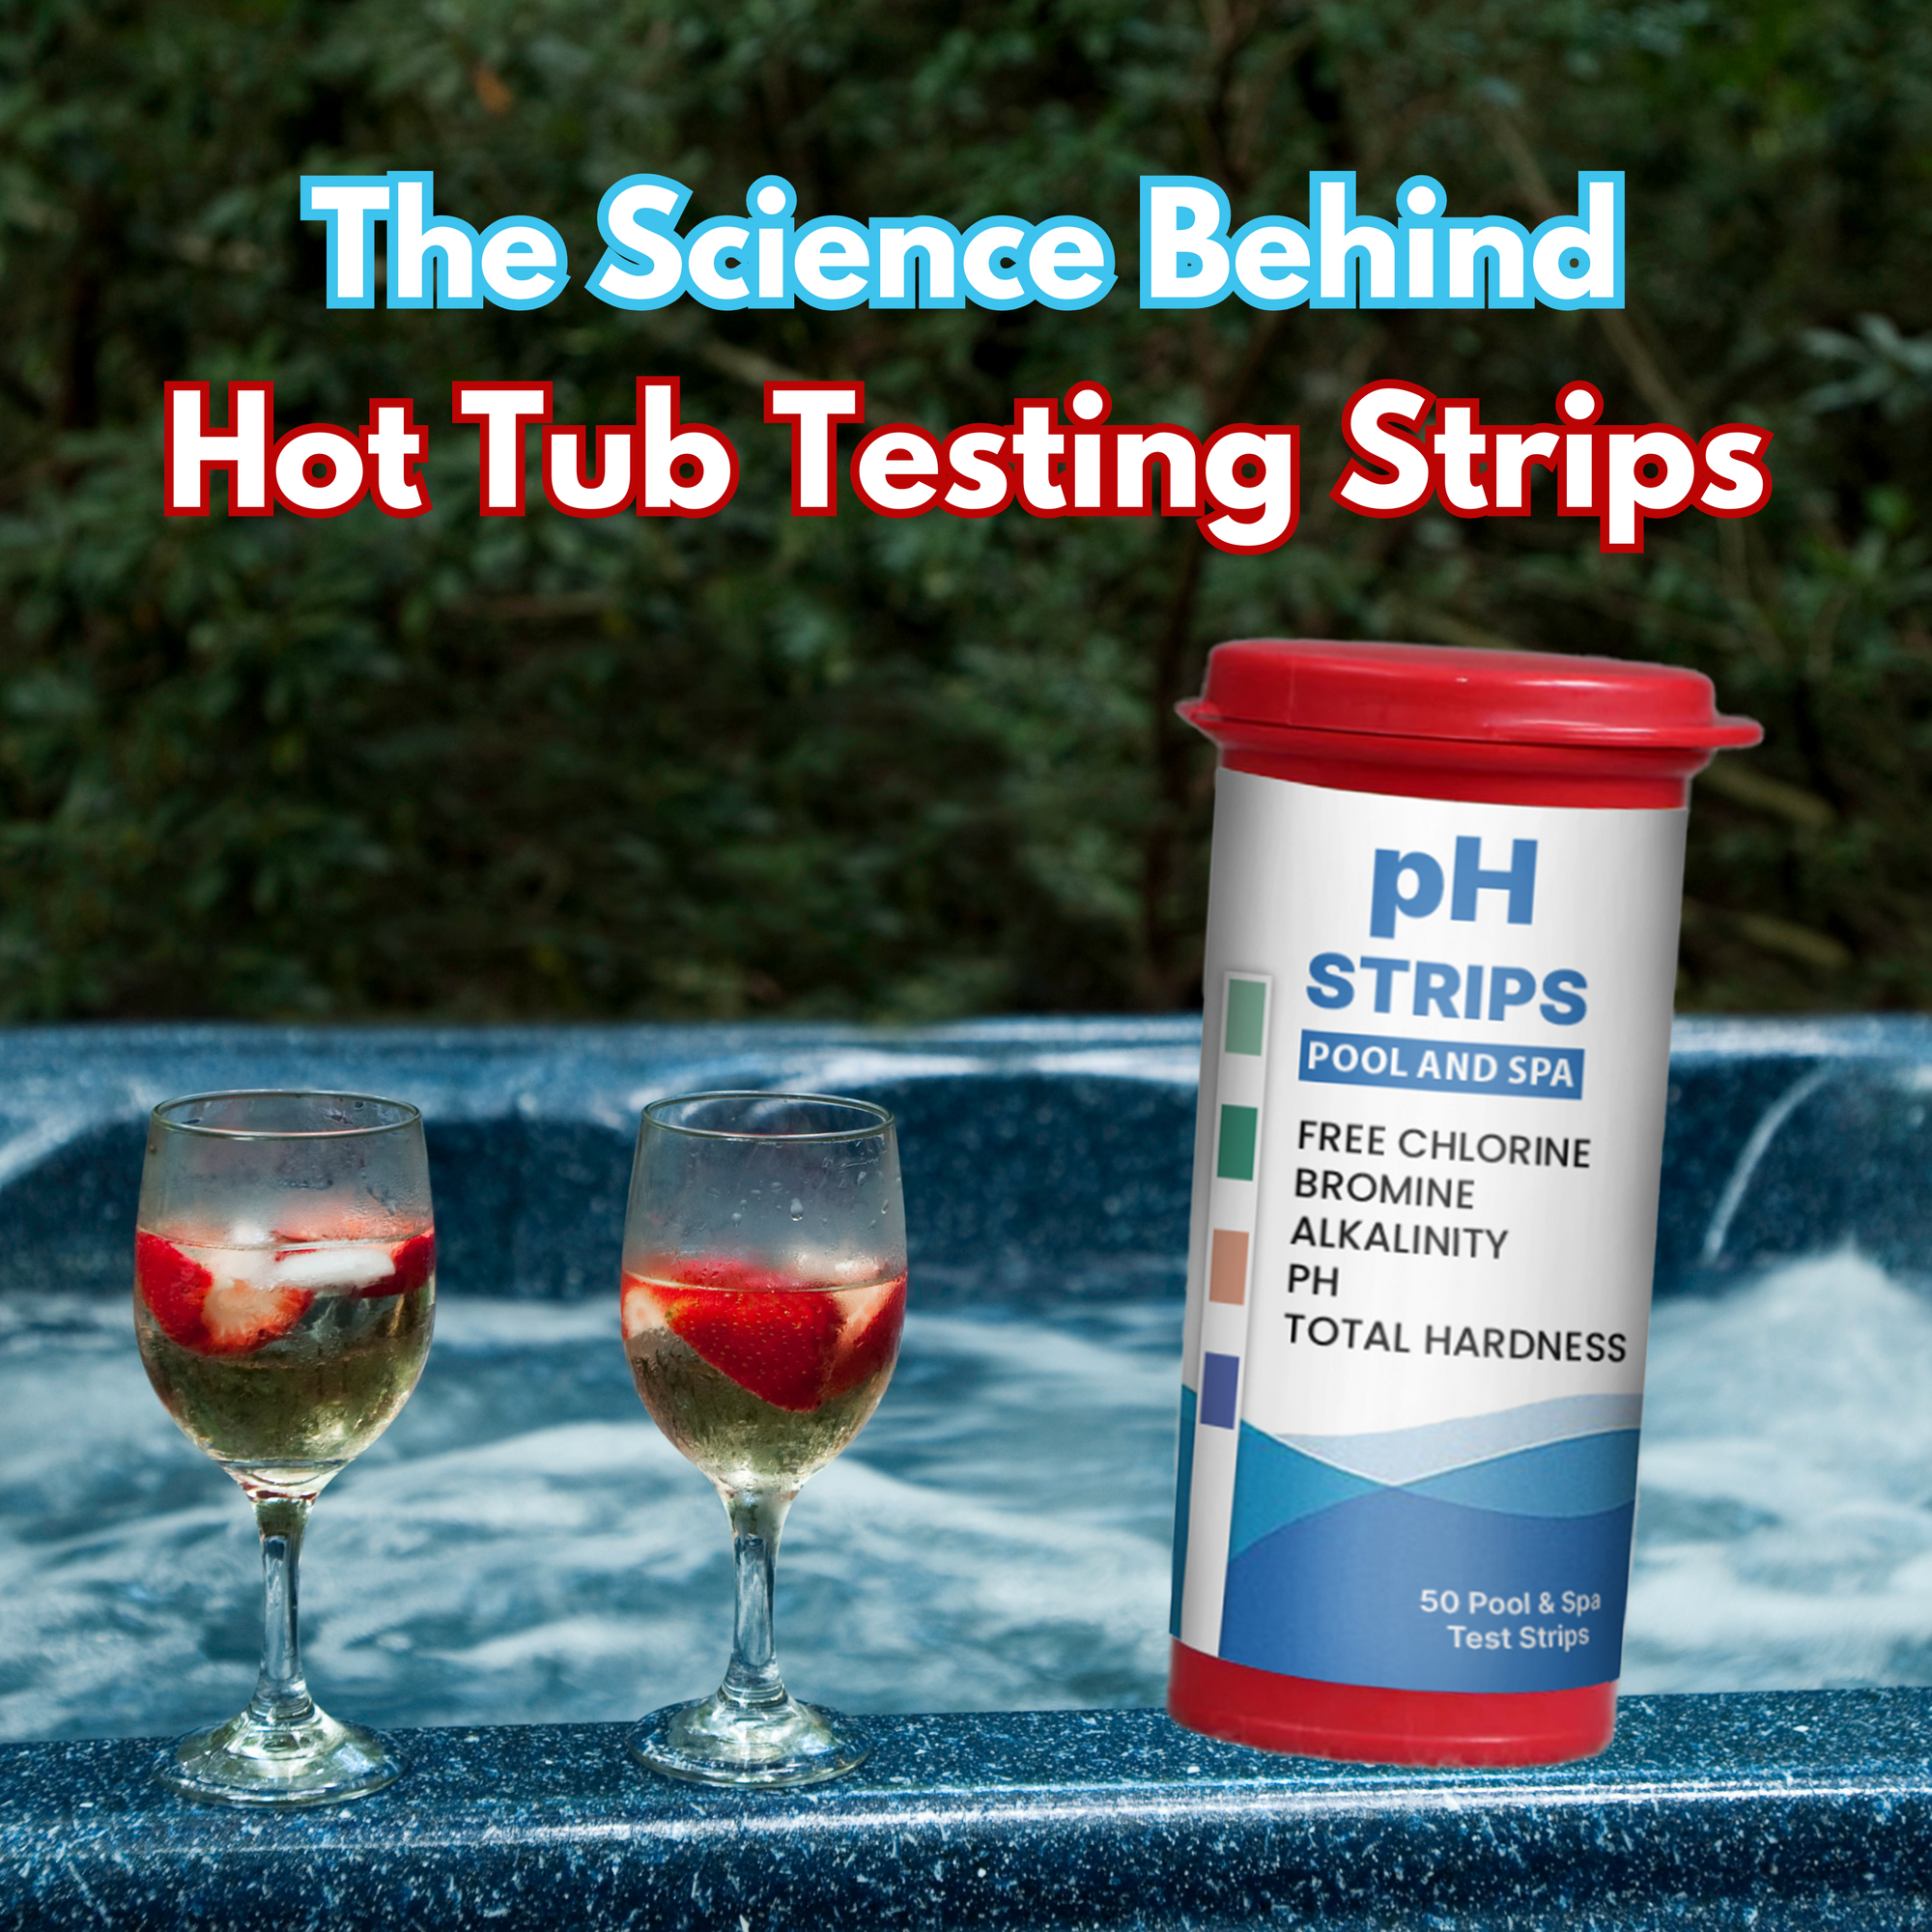 Family fun, worry-free: Ensure your hot tub is safe for everyone with regular hot tub testing strip checks.